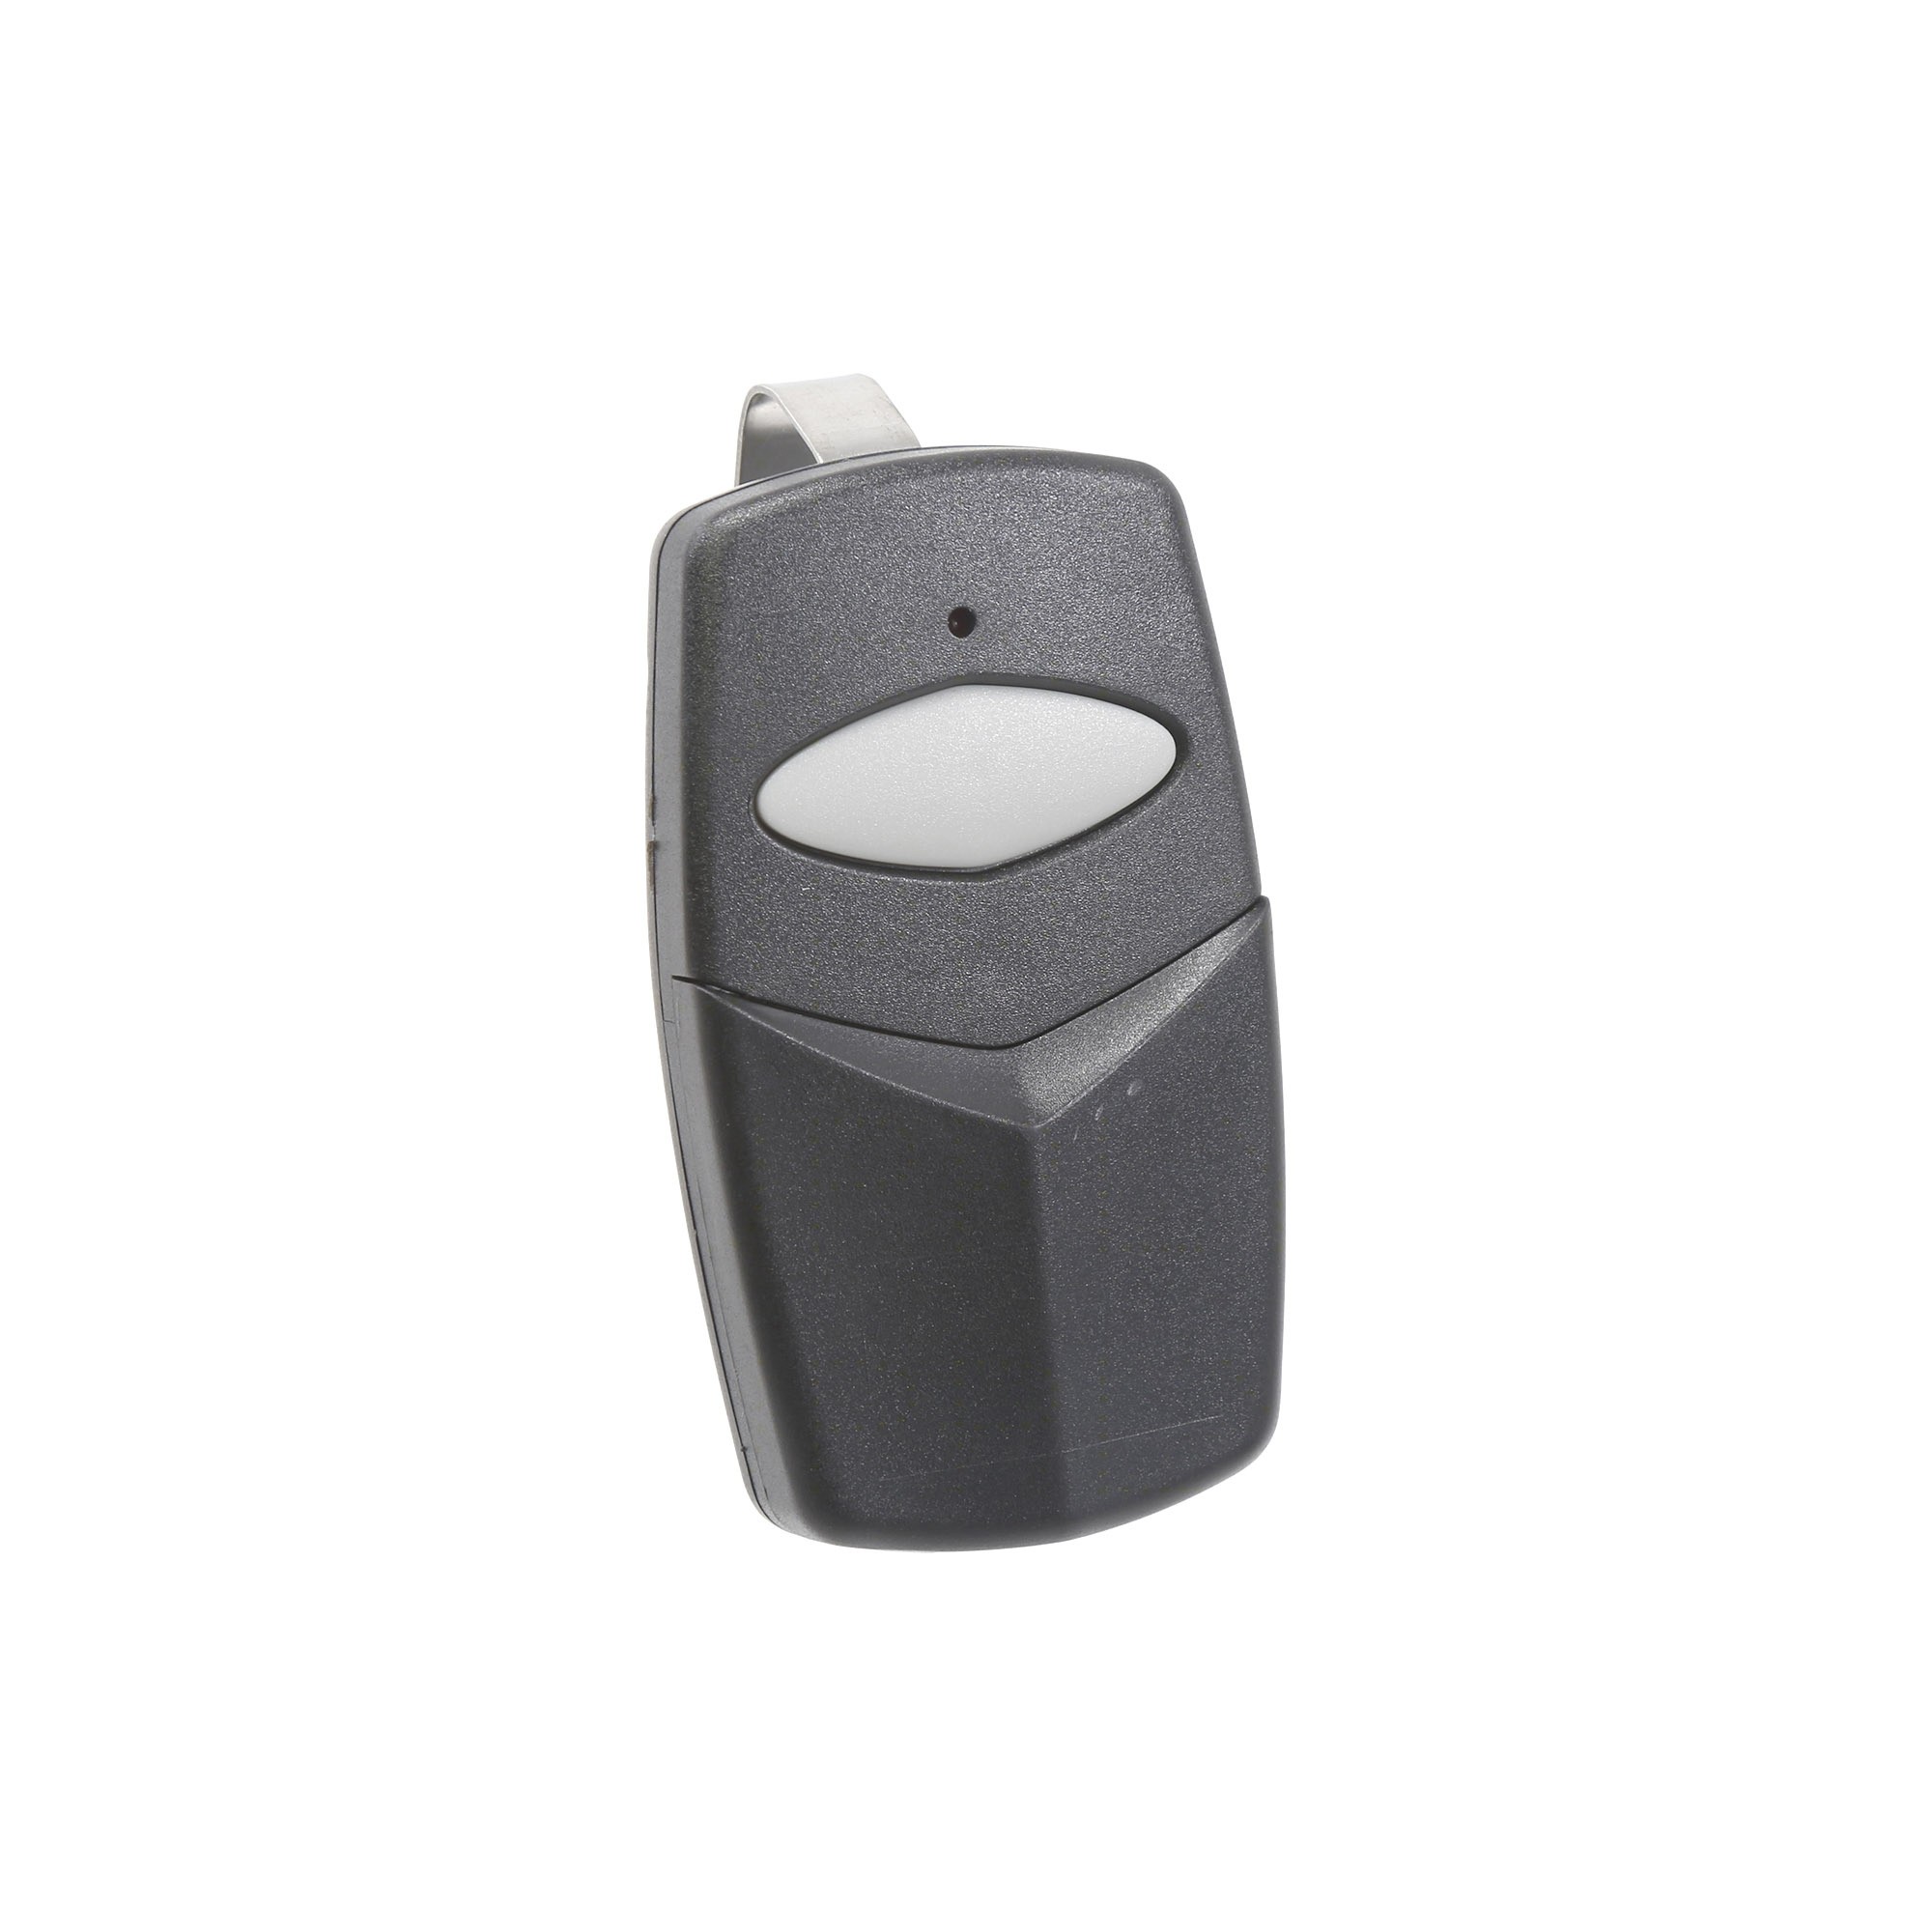 Wireless Push To Operate Button (Outdoor-Rated) Black - USAutomatic  030215-BLACK